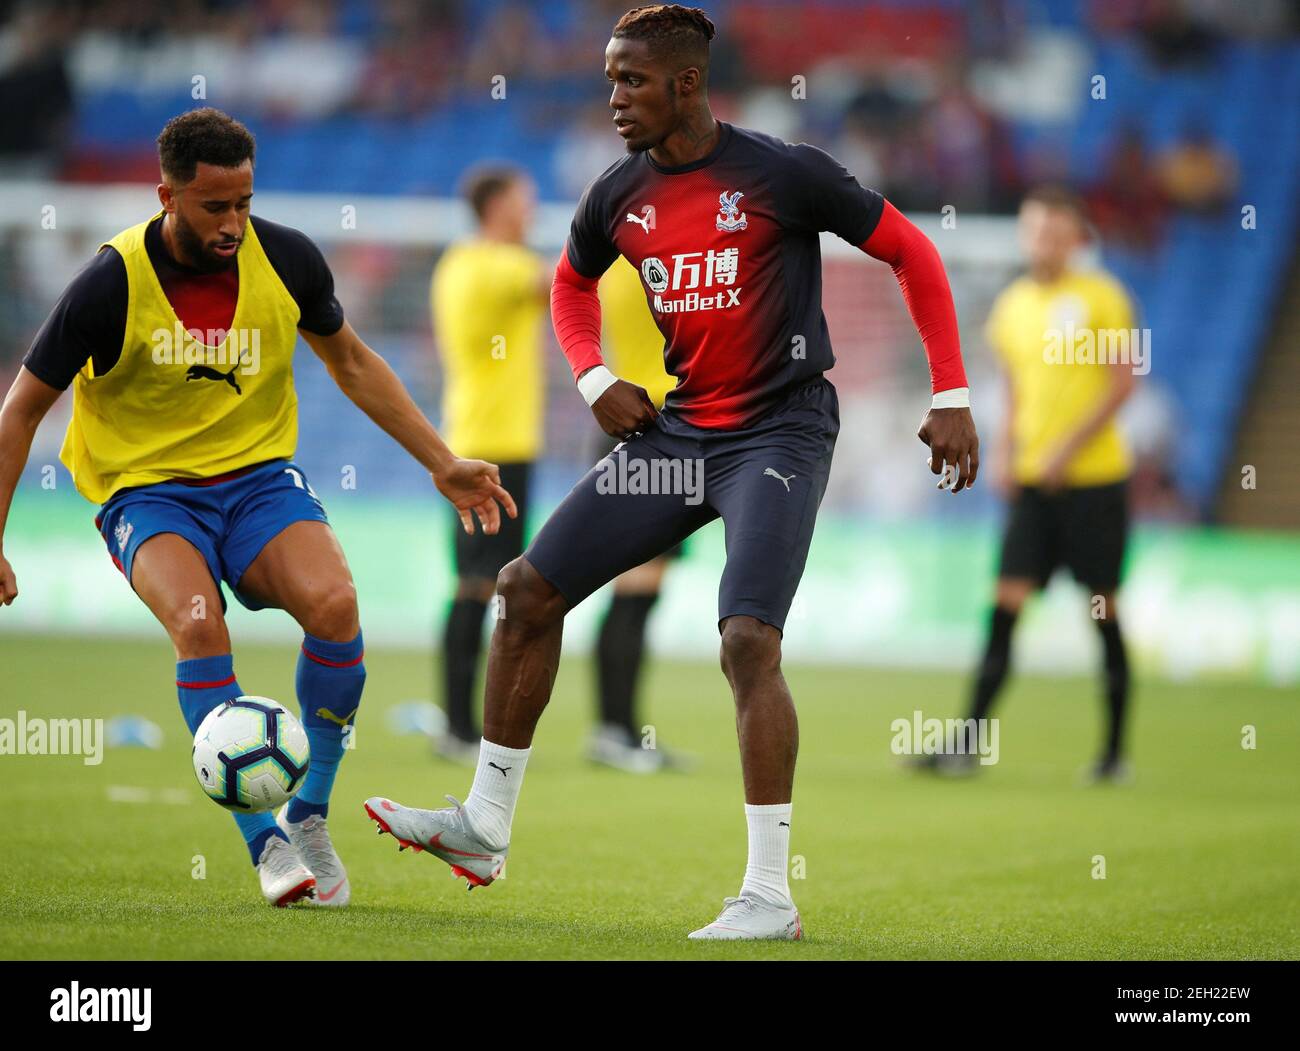 Soccer Football - Premier League - Crystal Palace v Liverpool - Selhurst Park, London, Britain - August 20, 2018  Crystal Palace's Andros Townsend and Wilfried Zaha during the warm up       Action Images via Reuters/John Sibley  EDITORIAL USE ONLY. No use with unauthorized audio, video, data, fixture lists, club/league logos or 'live' services. Online in-match use limited to 75 images, no video emulation. No use in betting, games or single club/league/player publications.  Please contact your account representative for further details. Stock Photo